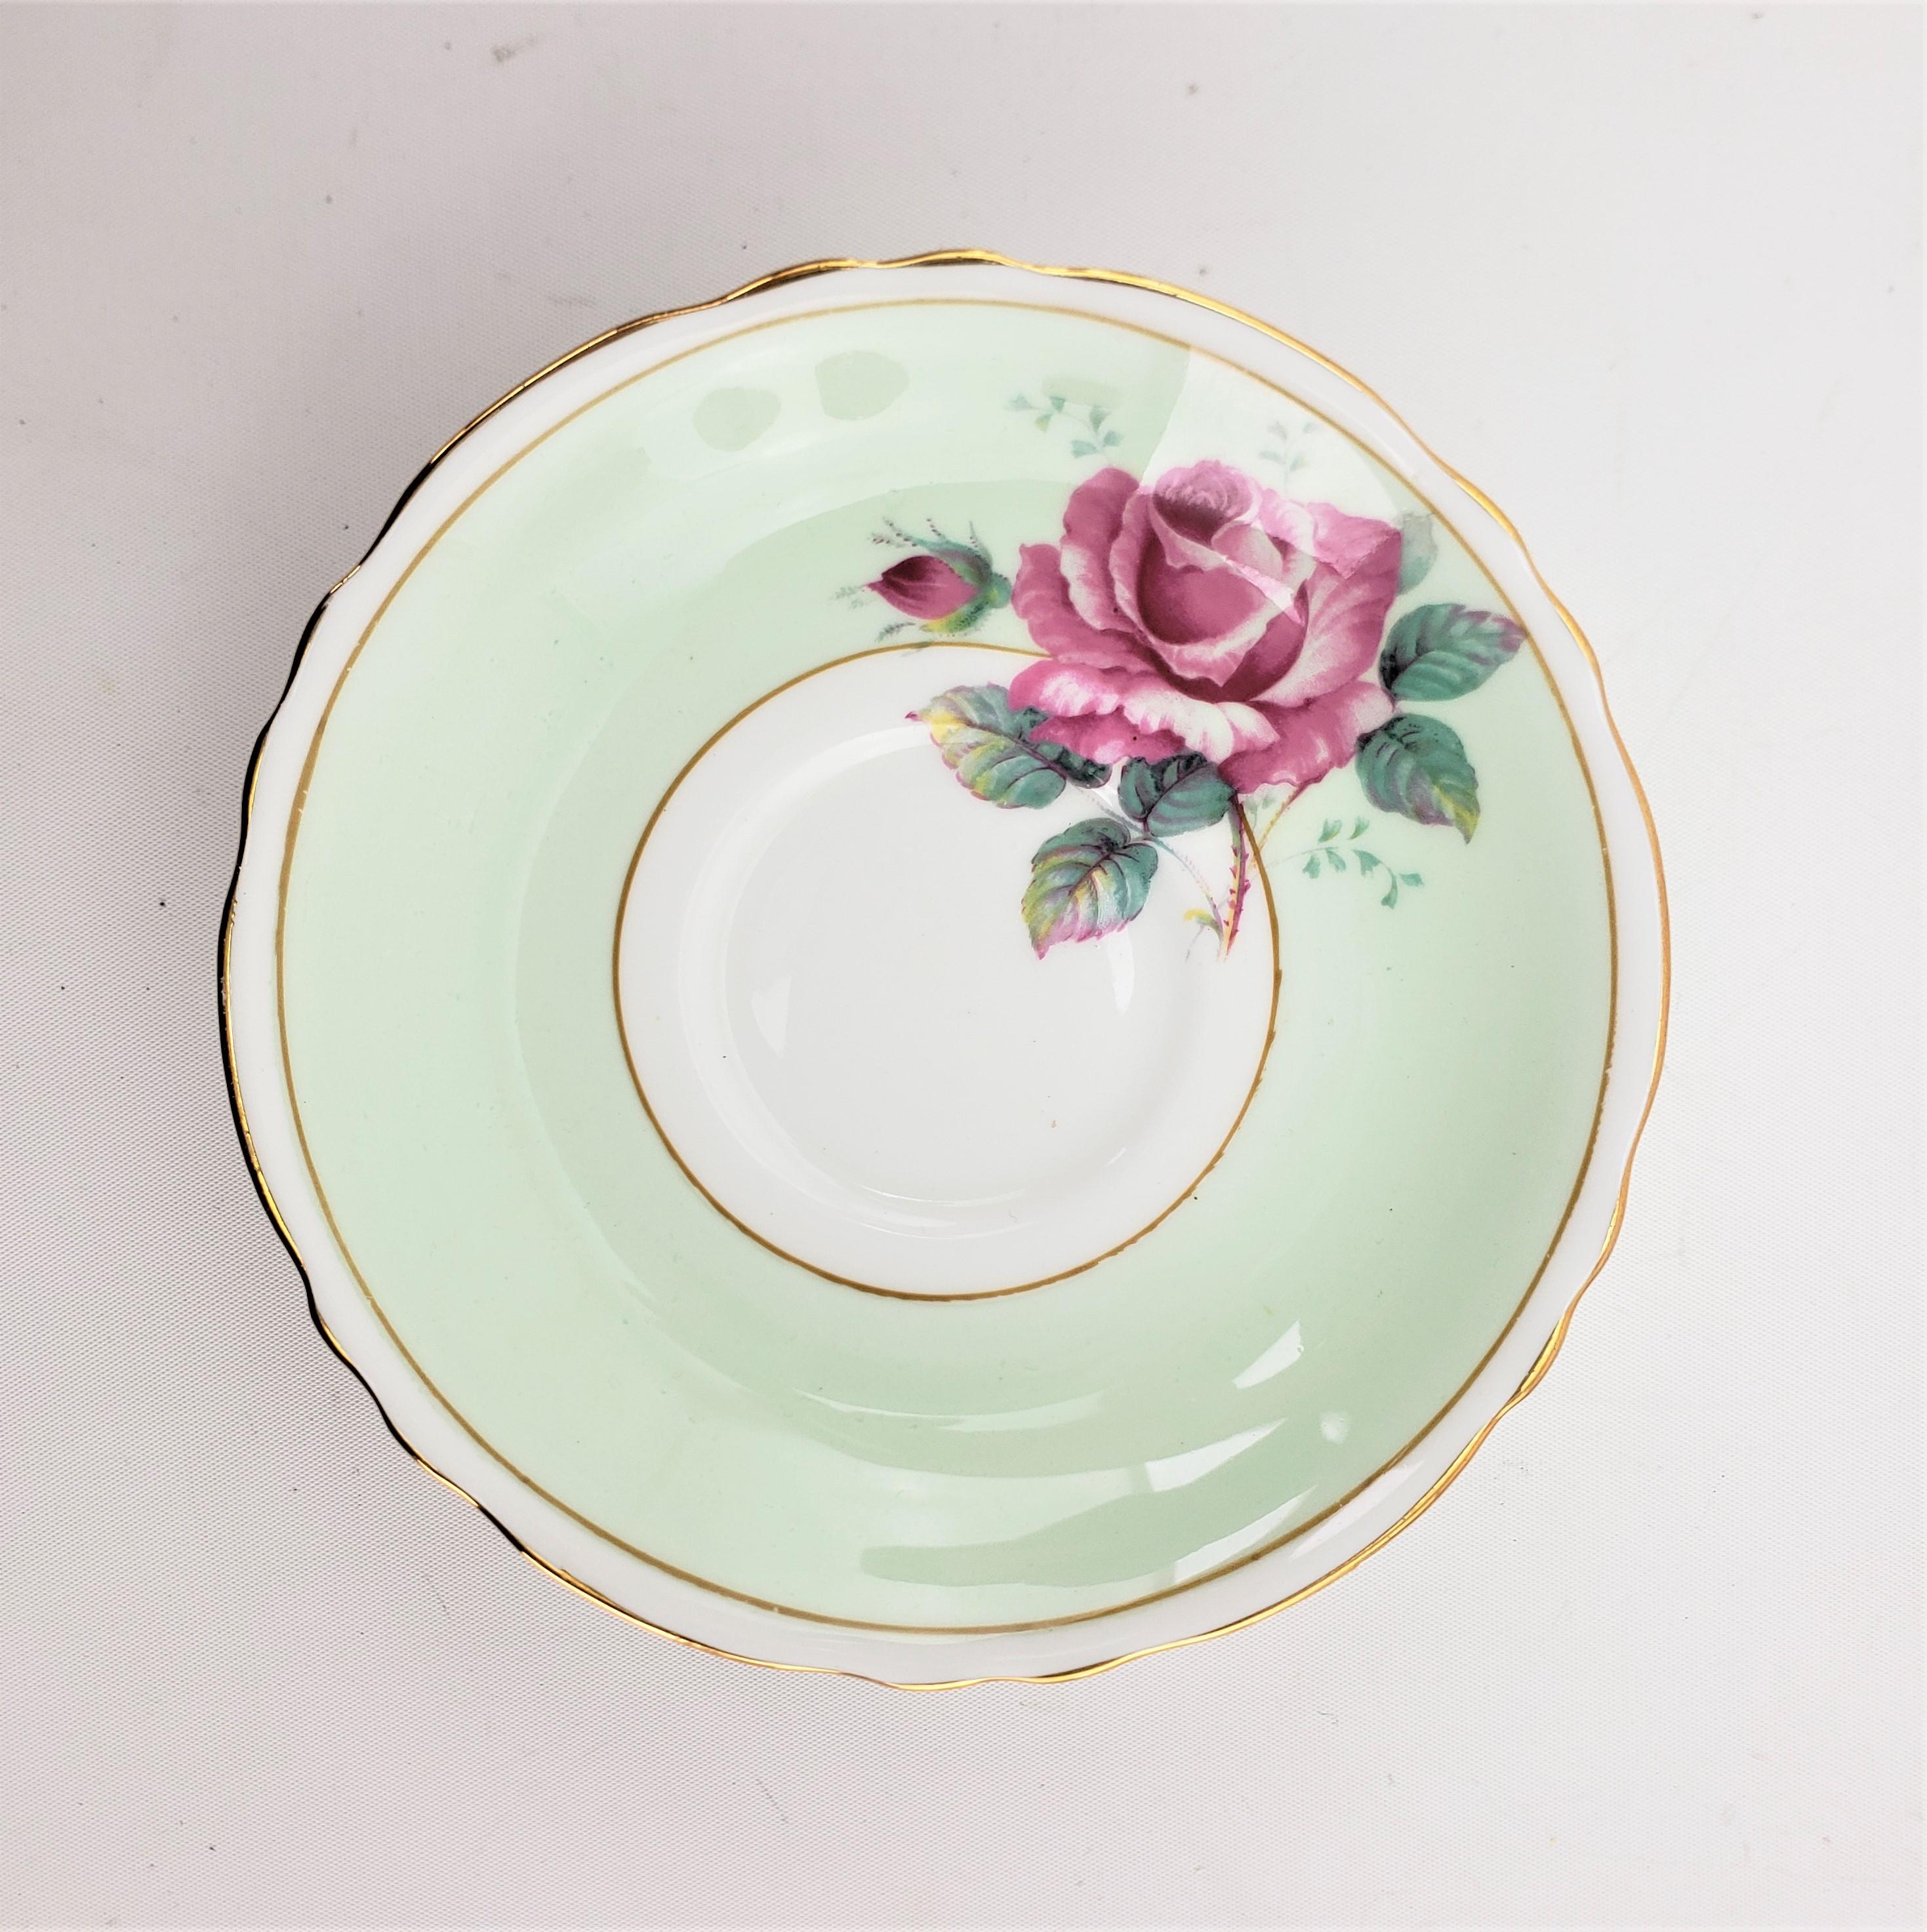 Vintage Paragon Double Warrant Bone China Teacup & Saucer with Red Cabbage Rose In Good Condition For Sale In Hamilton, Ontario